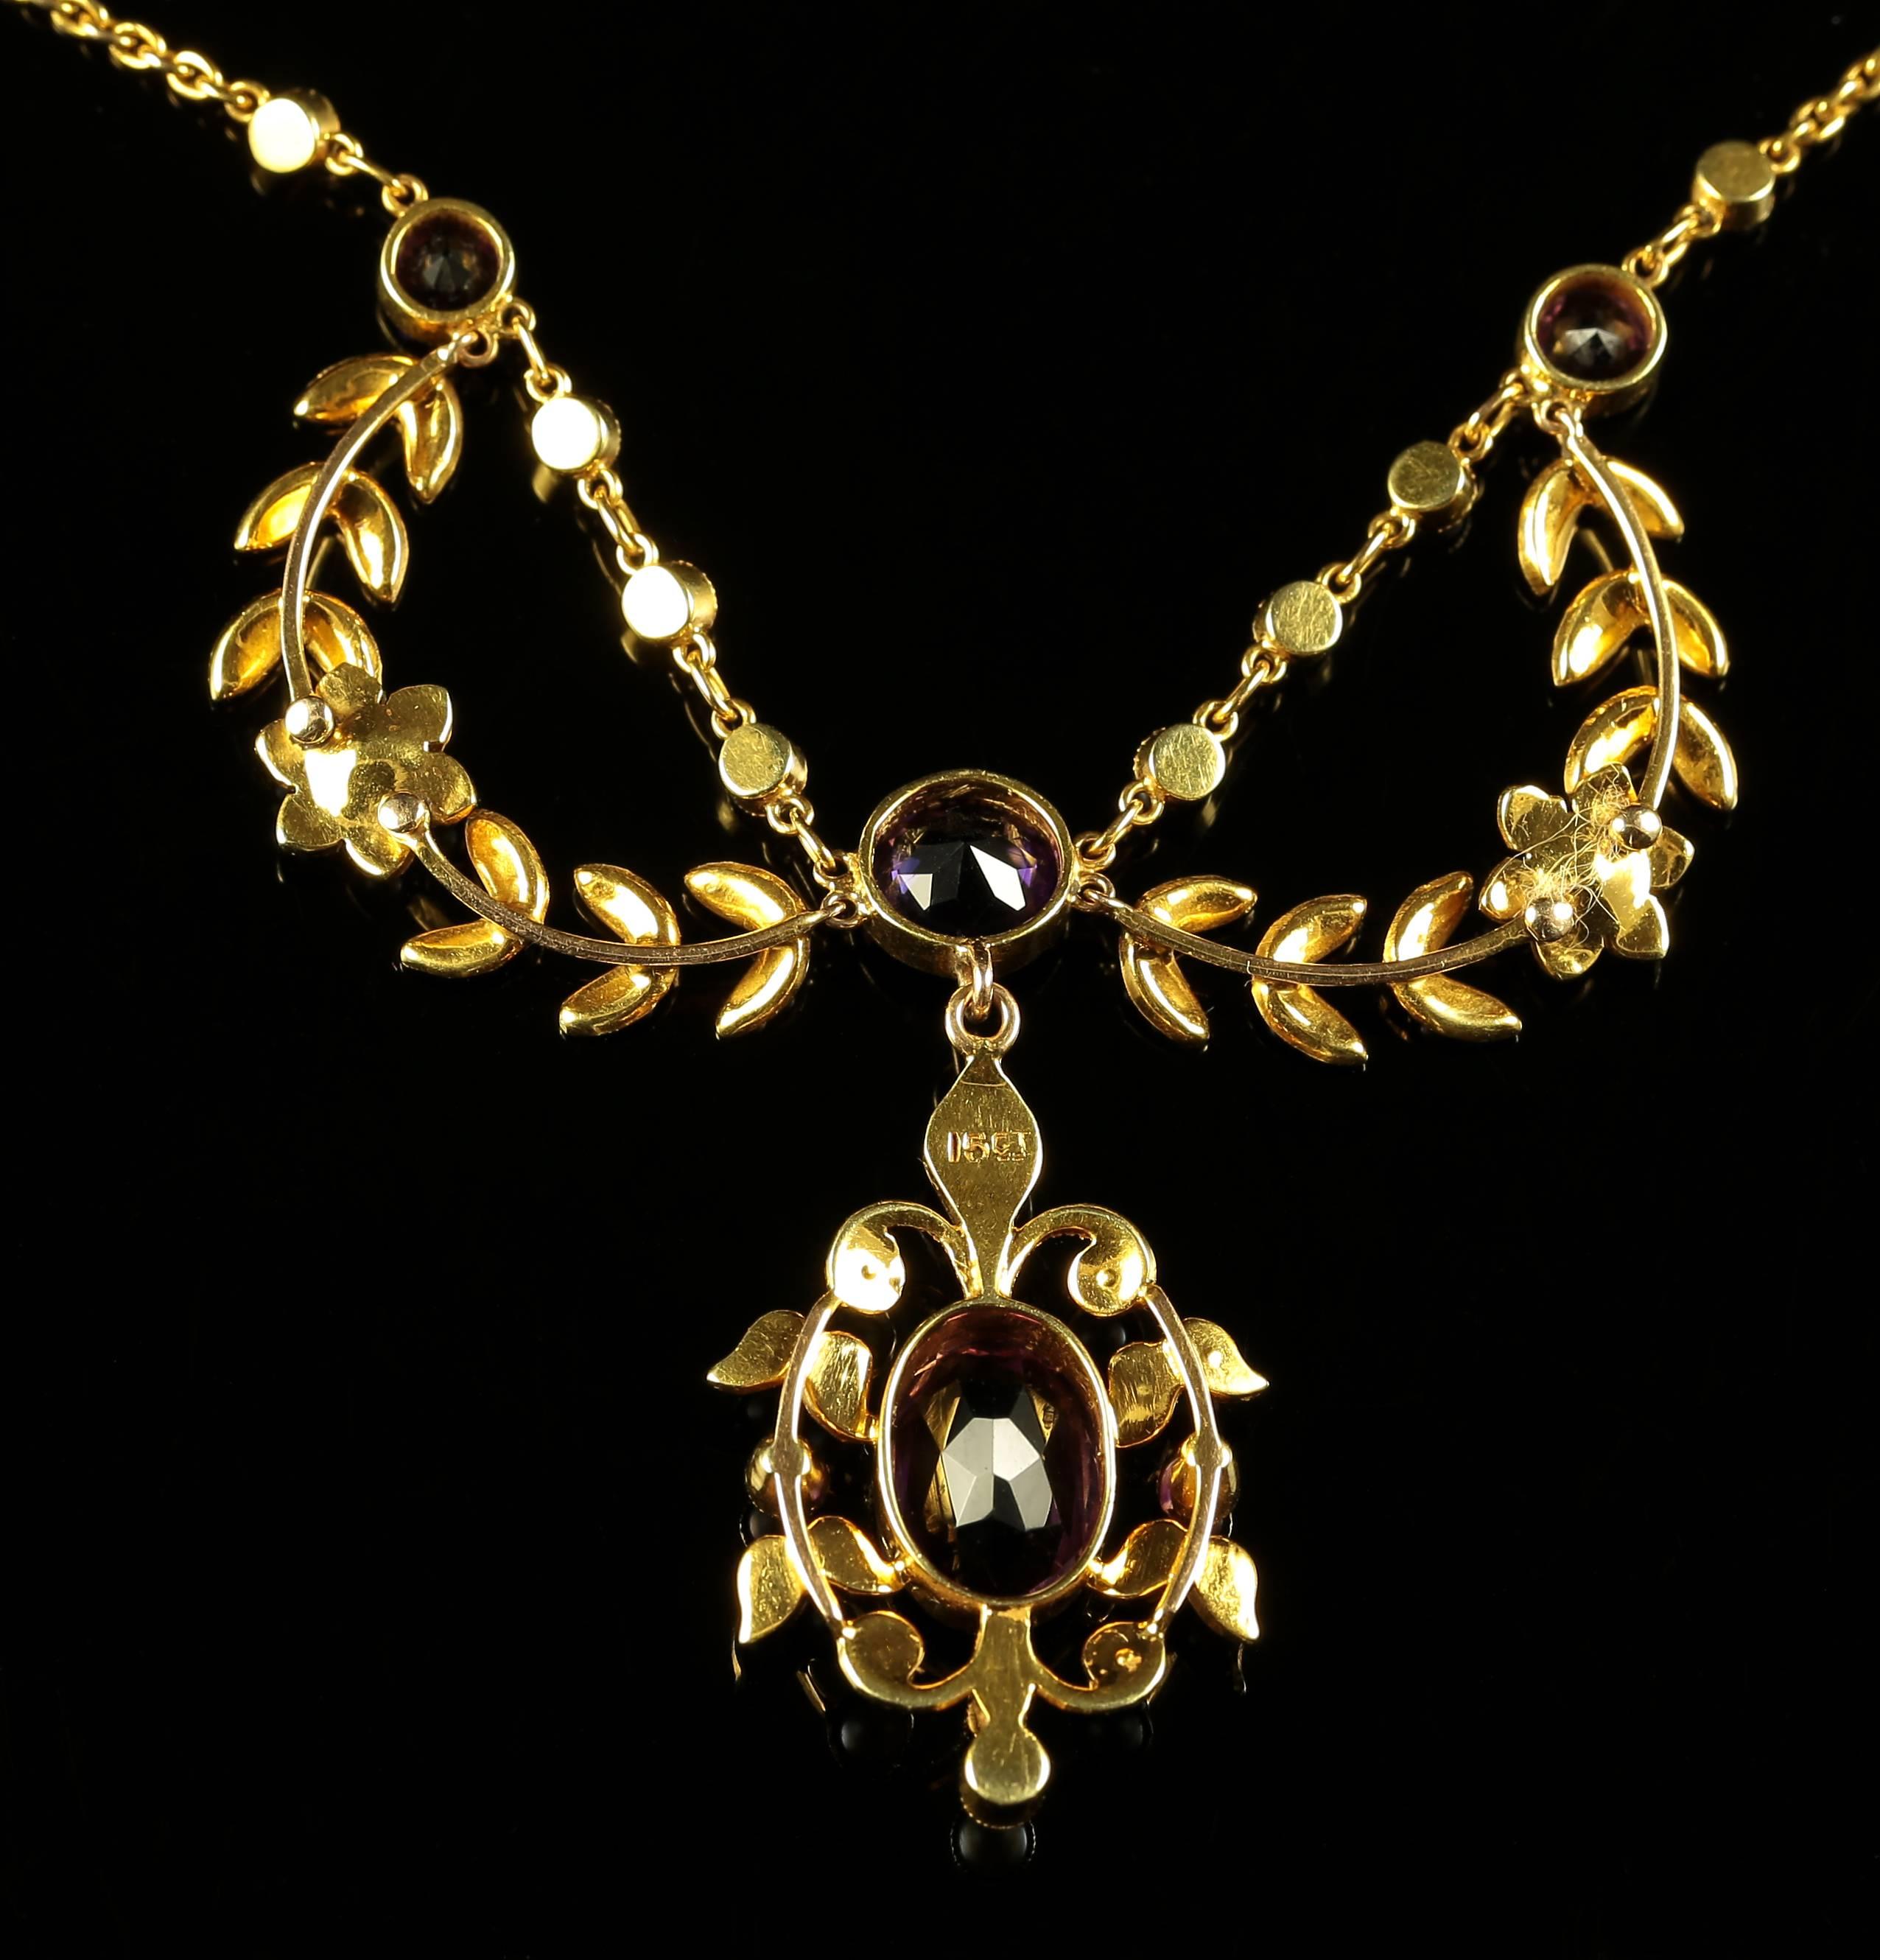 Antique Victorian Amethyst Pearl Necklace 15 Carat Gold Garland Necklace For Sale 2